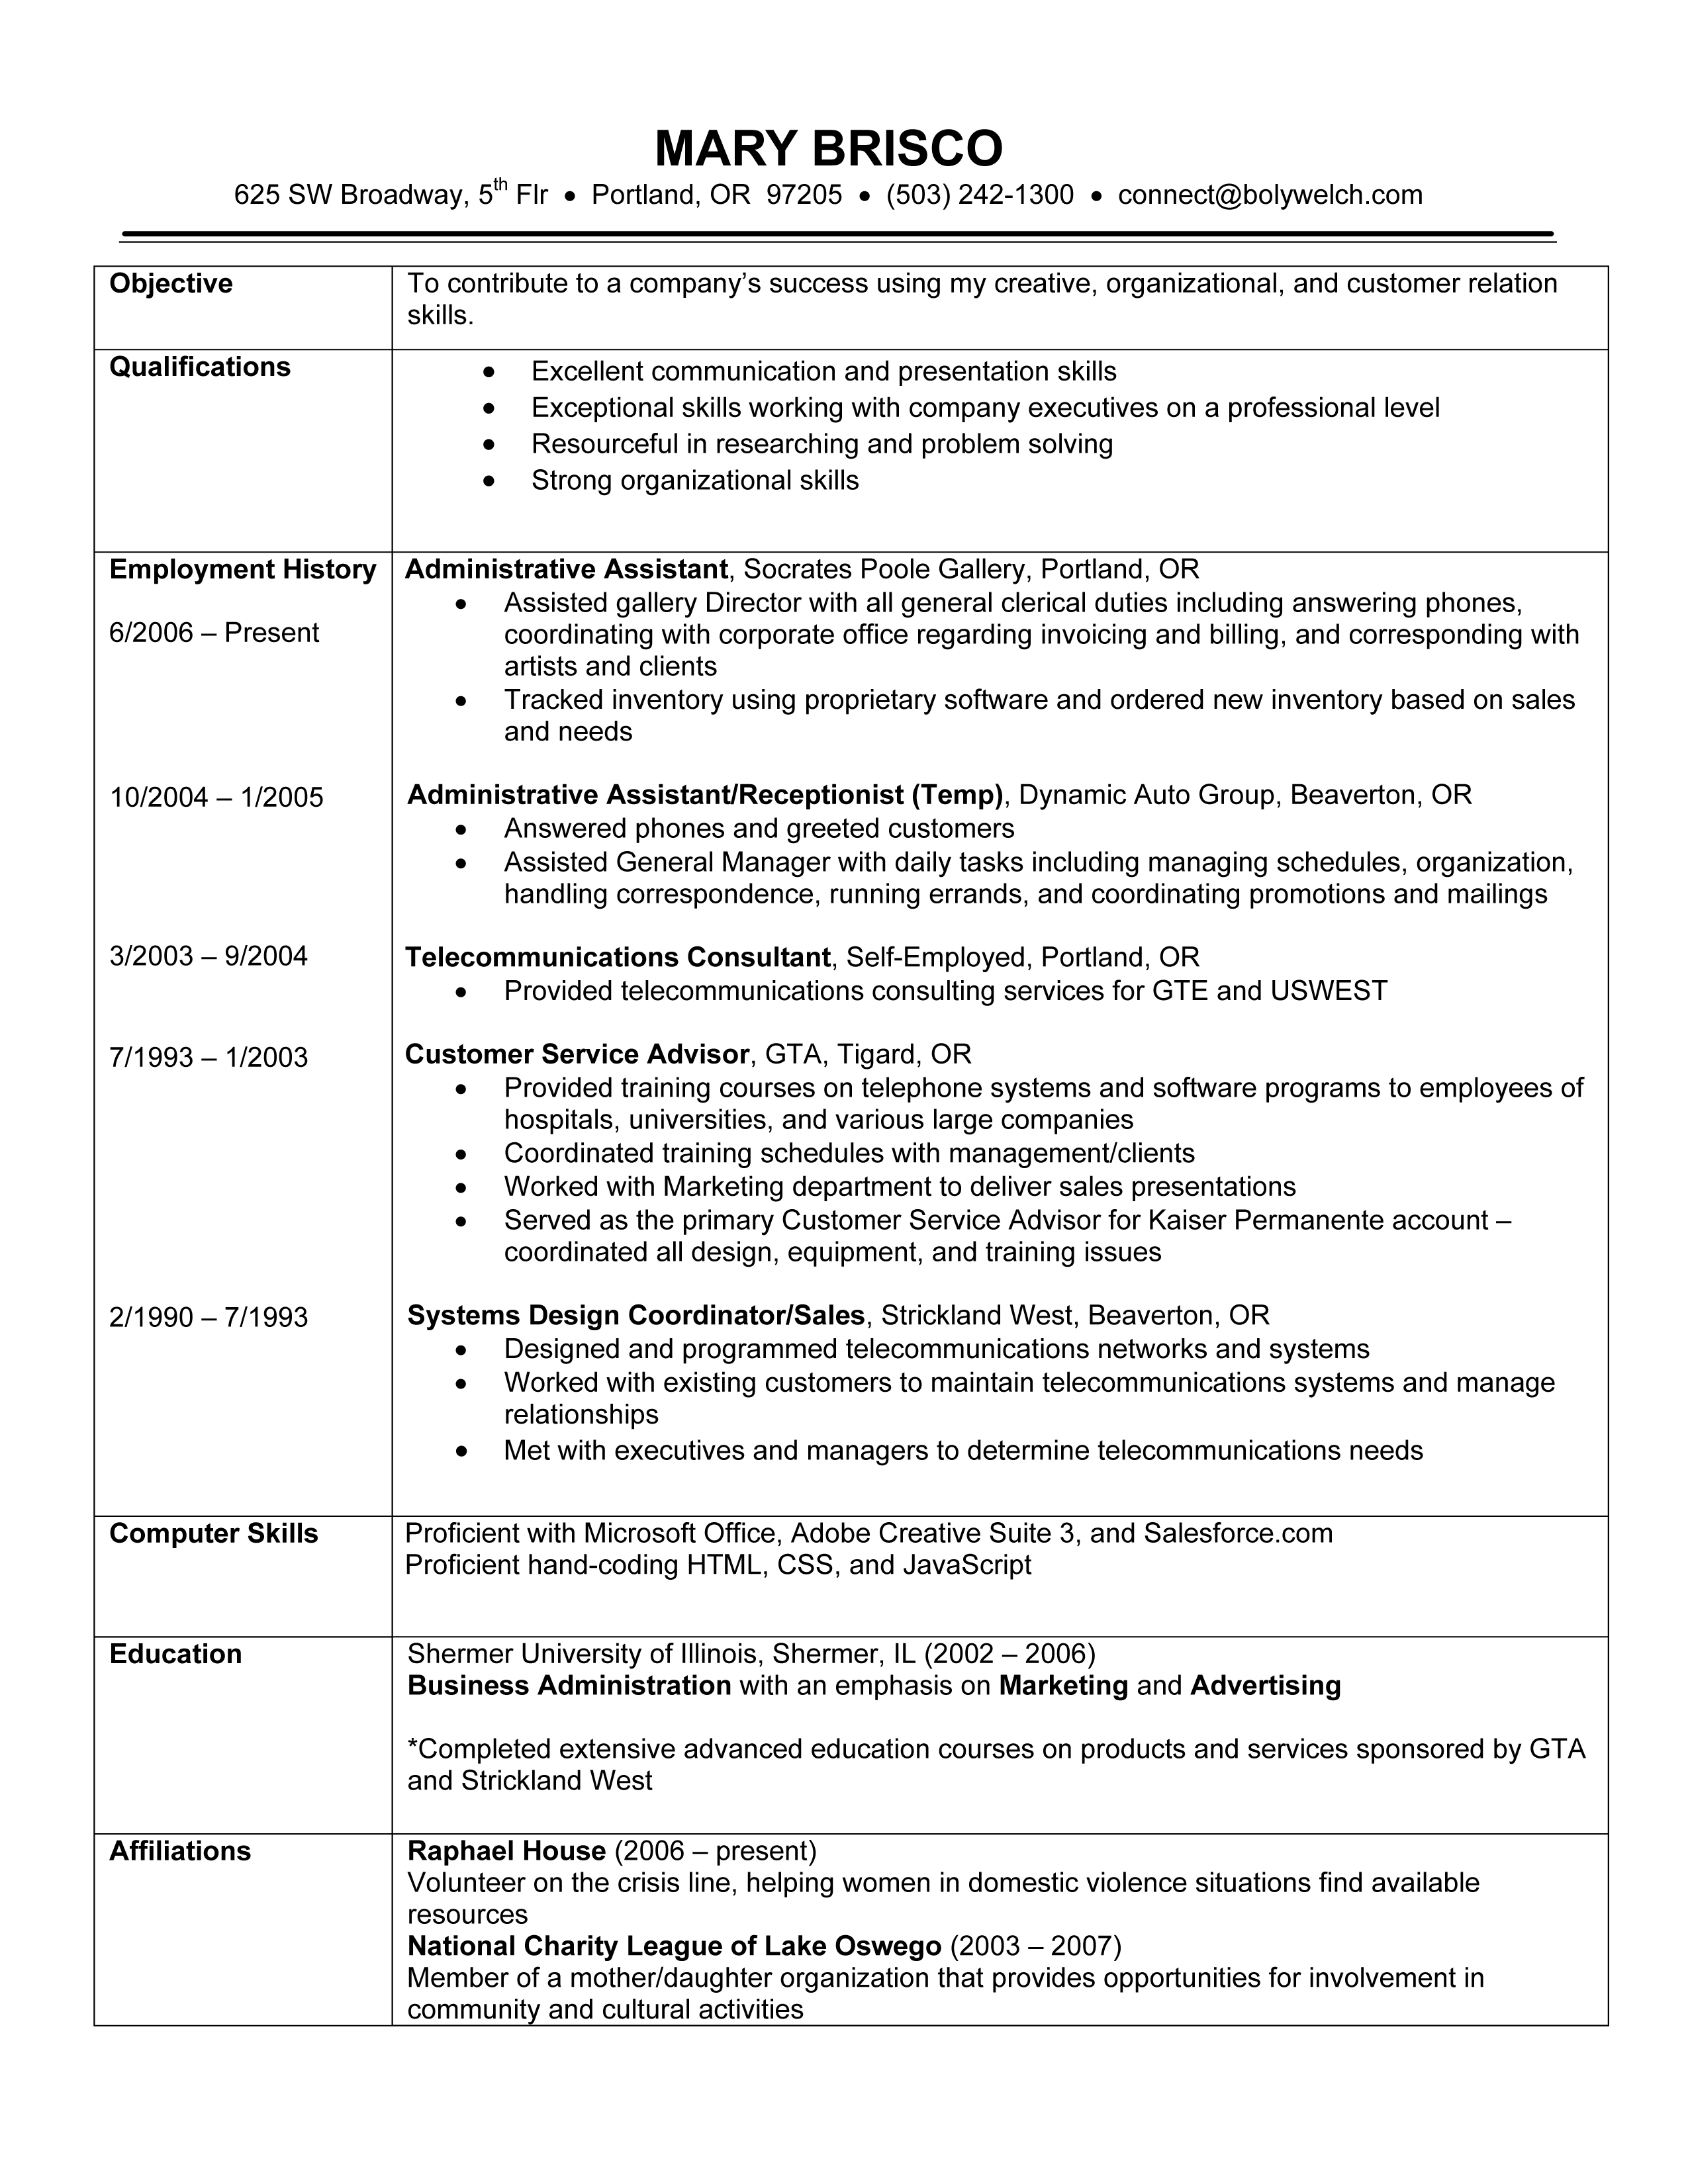 Chronological Resume Example // A chronological resume ...